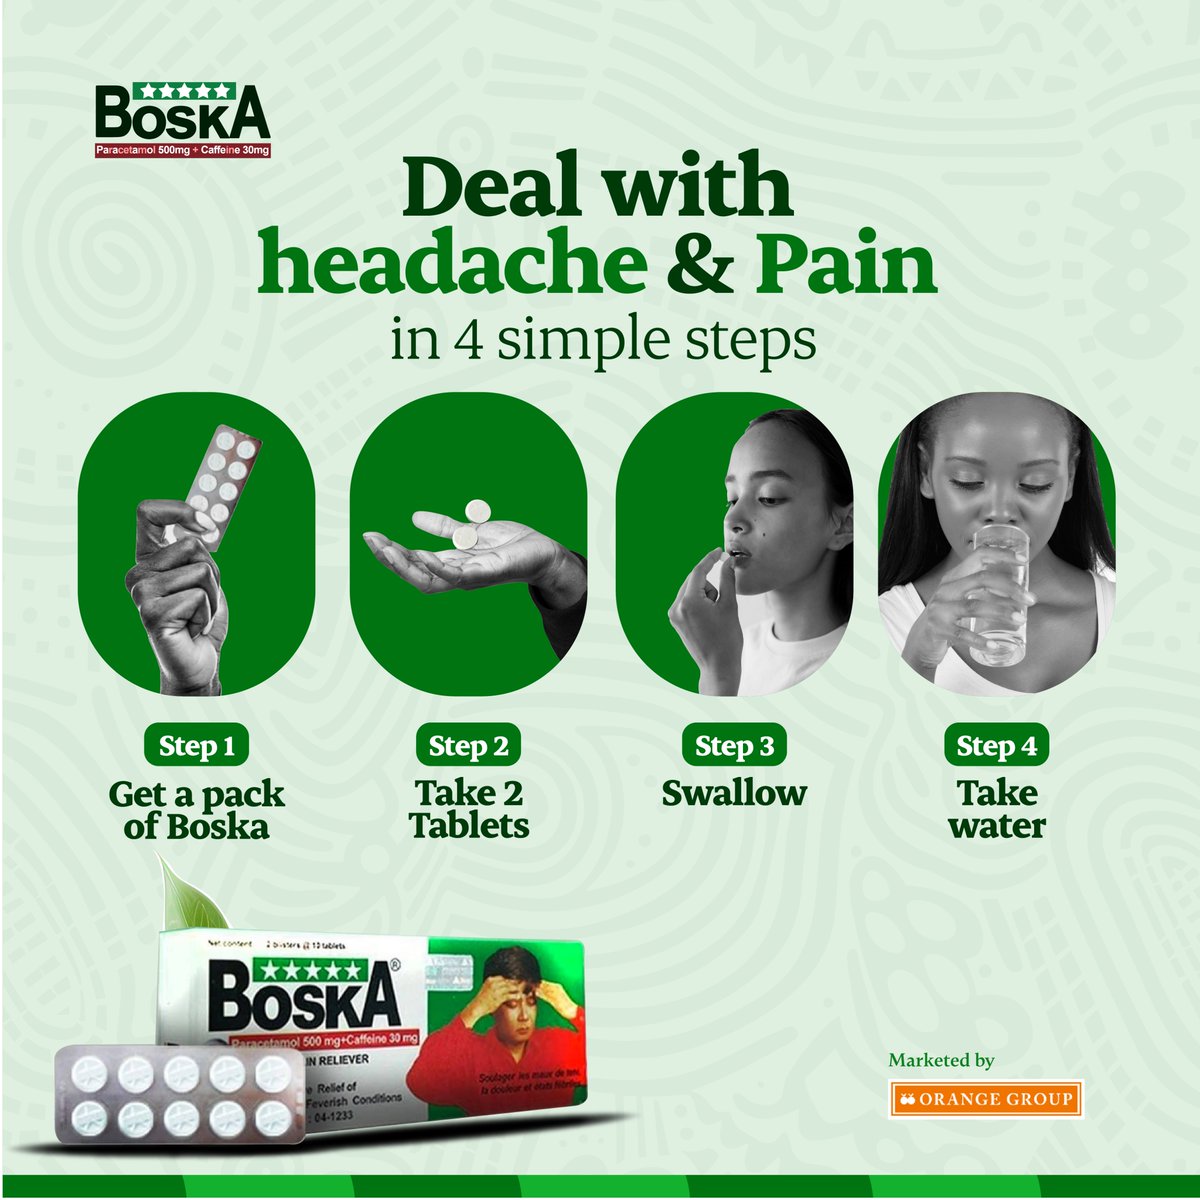 Experience fast and effective relief so you can tackle your day with ease. Don’t let pain hold you back – trust Boska in these four simple steps to keep you feeling your best!

#Boska #bepainfree #BoskaRelief #painrelief #headache #mondaymood